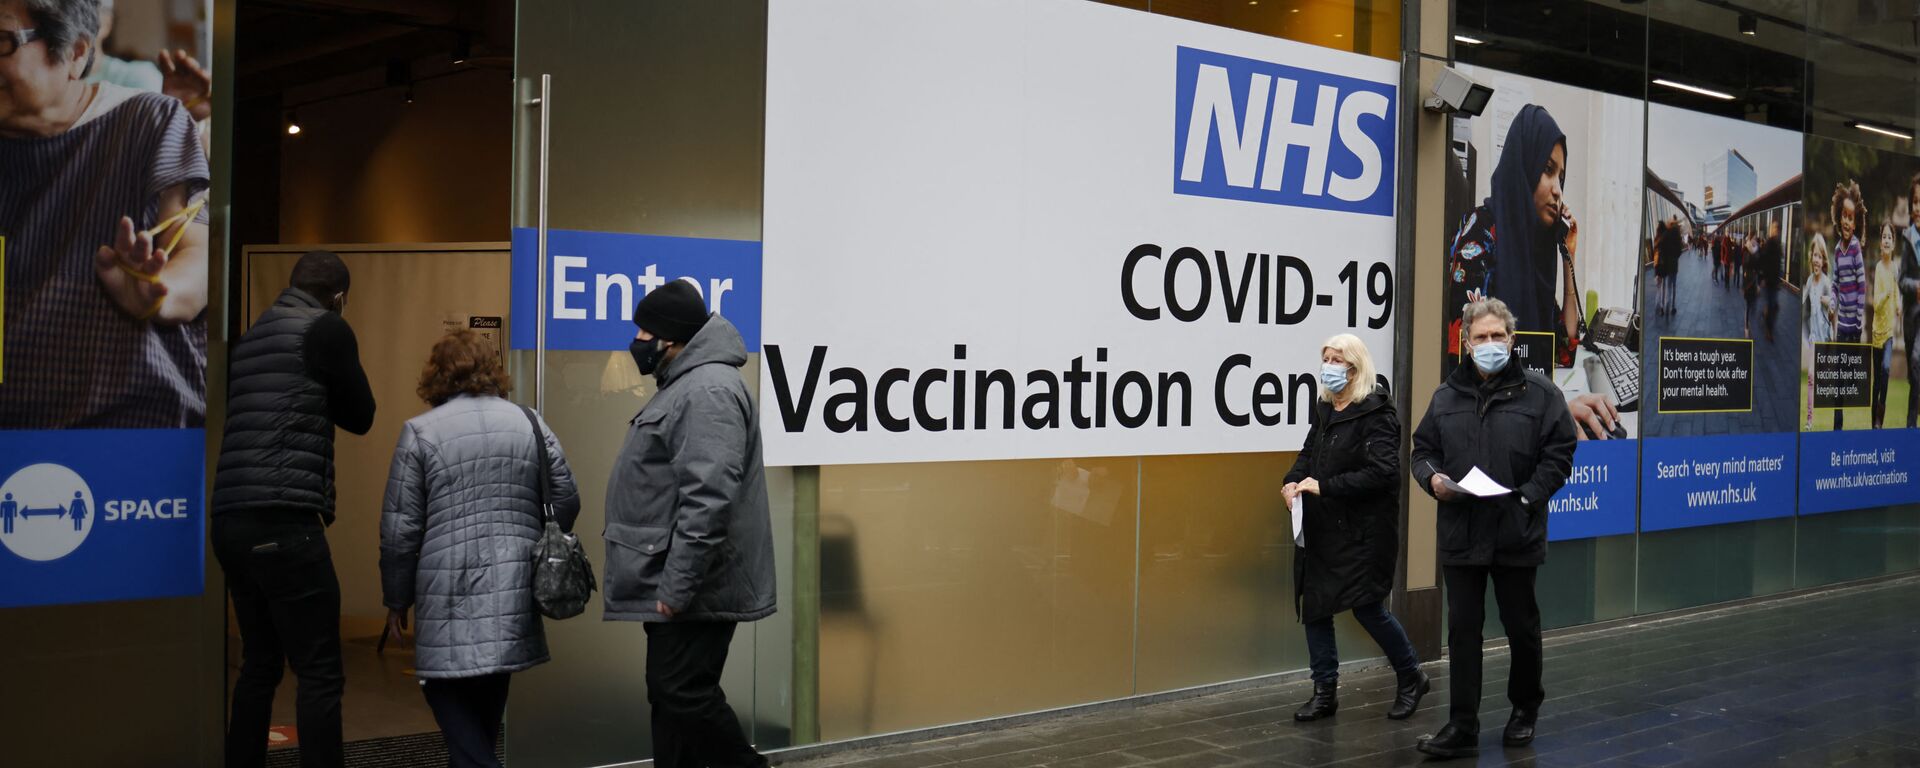 People queue to enter an NHS Covid-19 vaccination centre in Westfield Stratford City shopping centre in east London on February 15, 2021 as Britain's largest ever vaccination programme continues. - Prime Minister Boris Johnson called Britain hitting a target of inoculating 15 million of the most vulnerable people with a first coronavirus jab a significant milestone, as the country prepared for the next phase of its vaccination programme. (Photo by Tolga Akmen / AFP) - Sputnik International, 1920, 31.07.2021